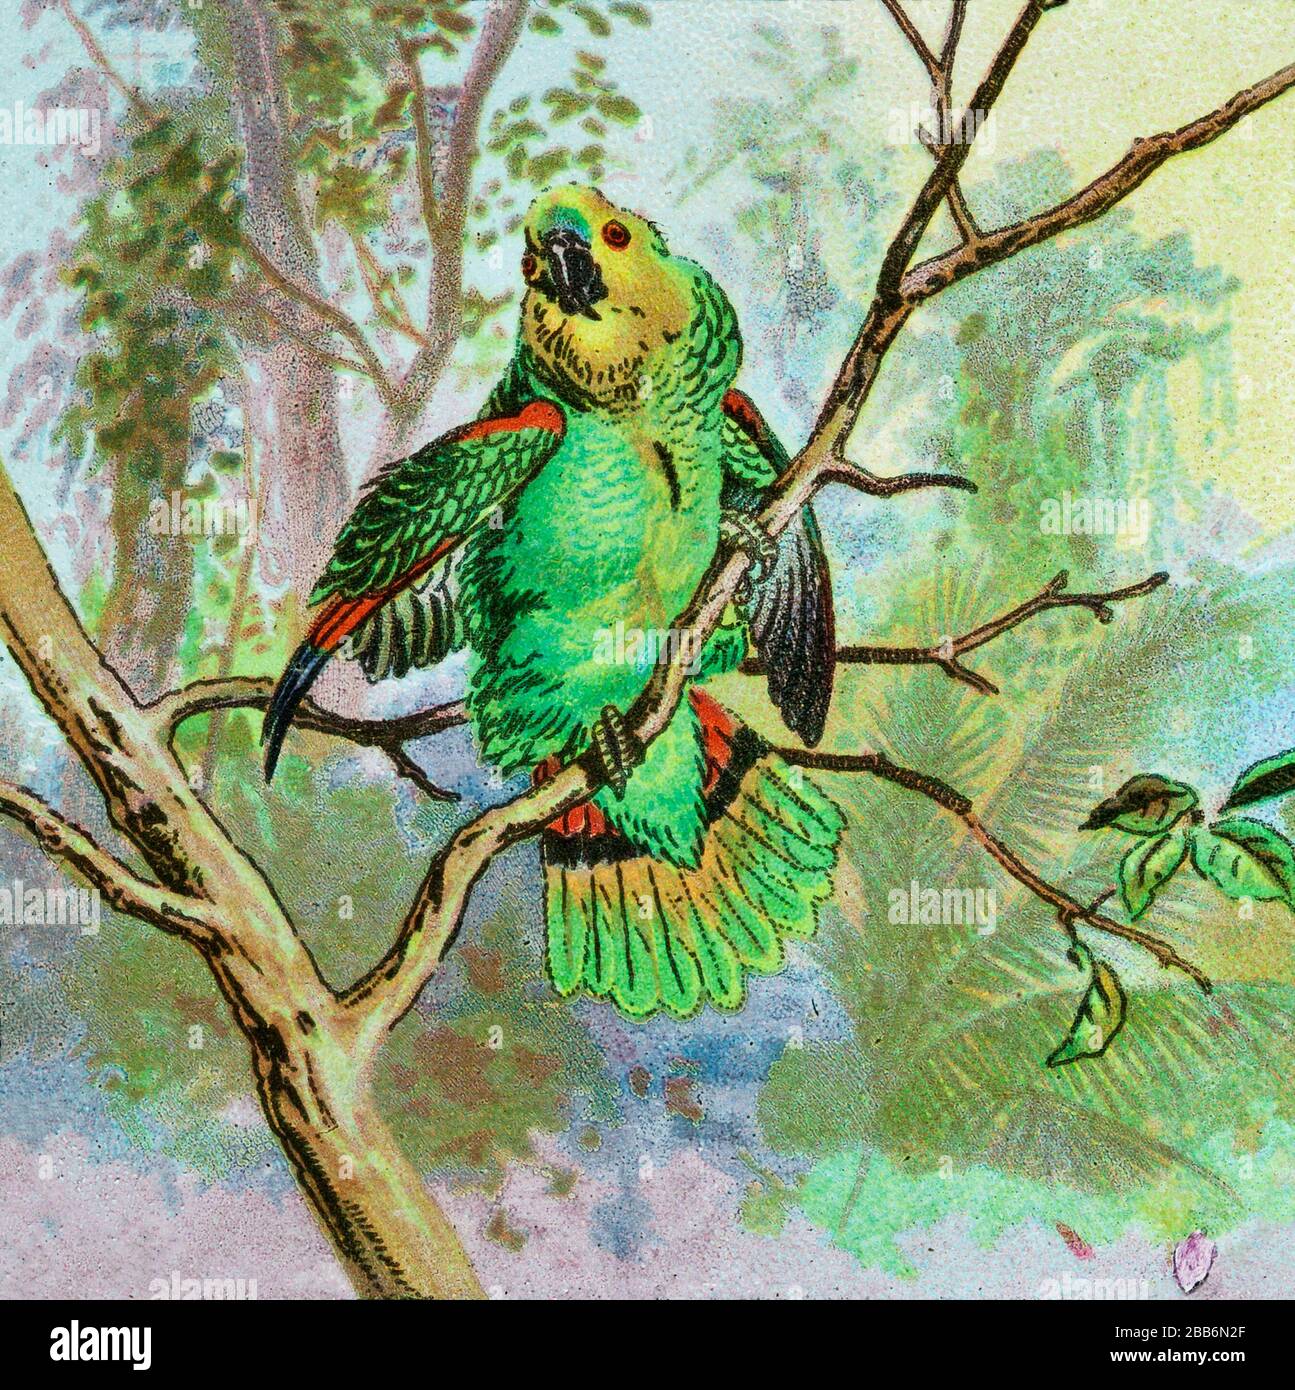 These are a natural scenic illustration of wildlife, natural habitat, animals, aviaries, animal kingdom, sanctuary, wildlife refuge, biosphere, conservation and illustrations of flora and fauna presented circa 1900 Stock Photo